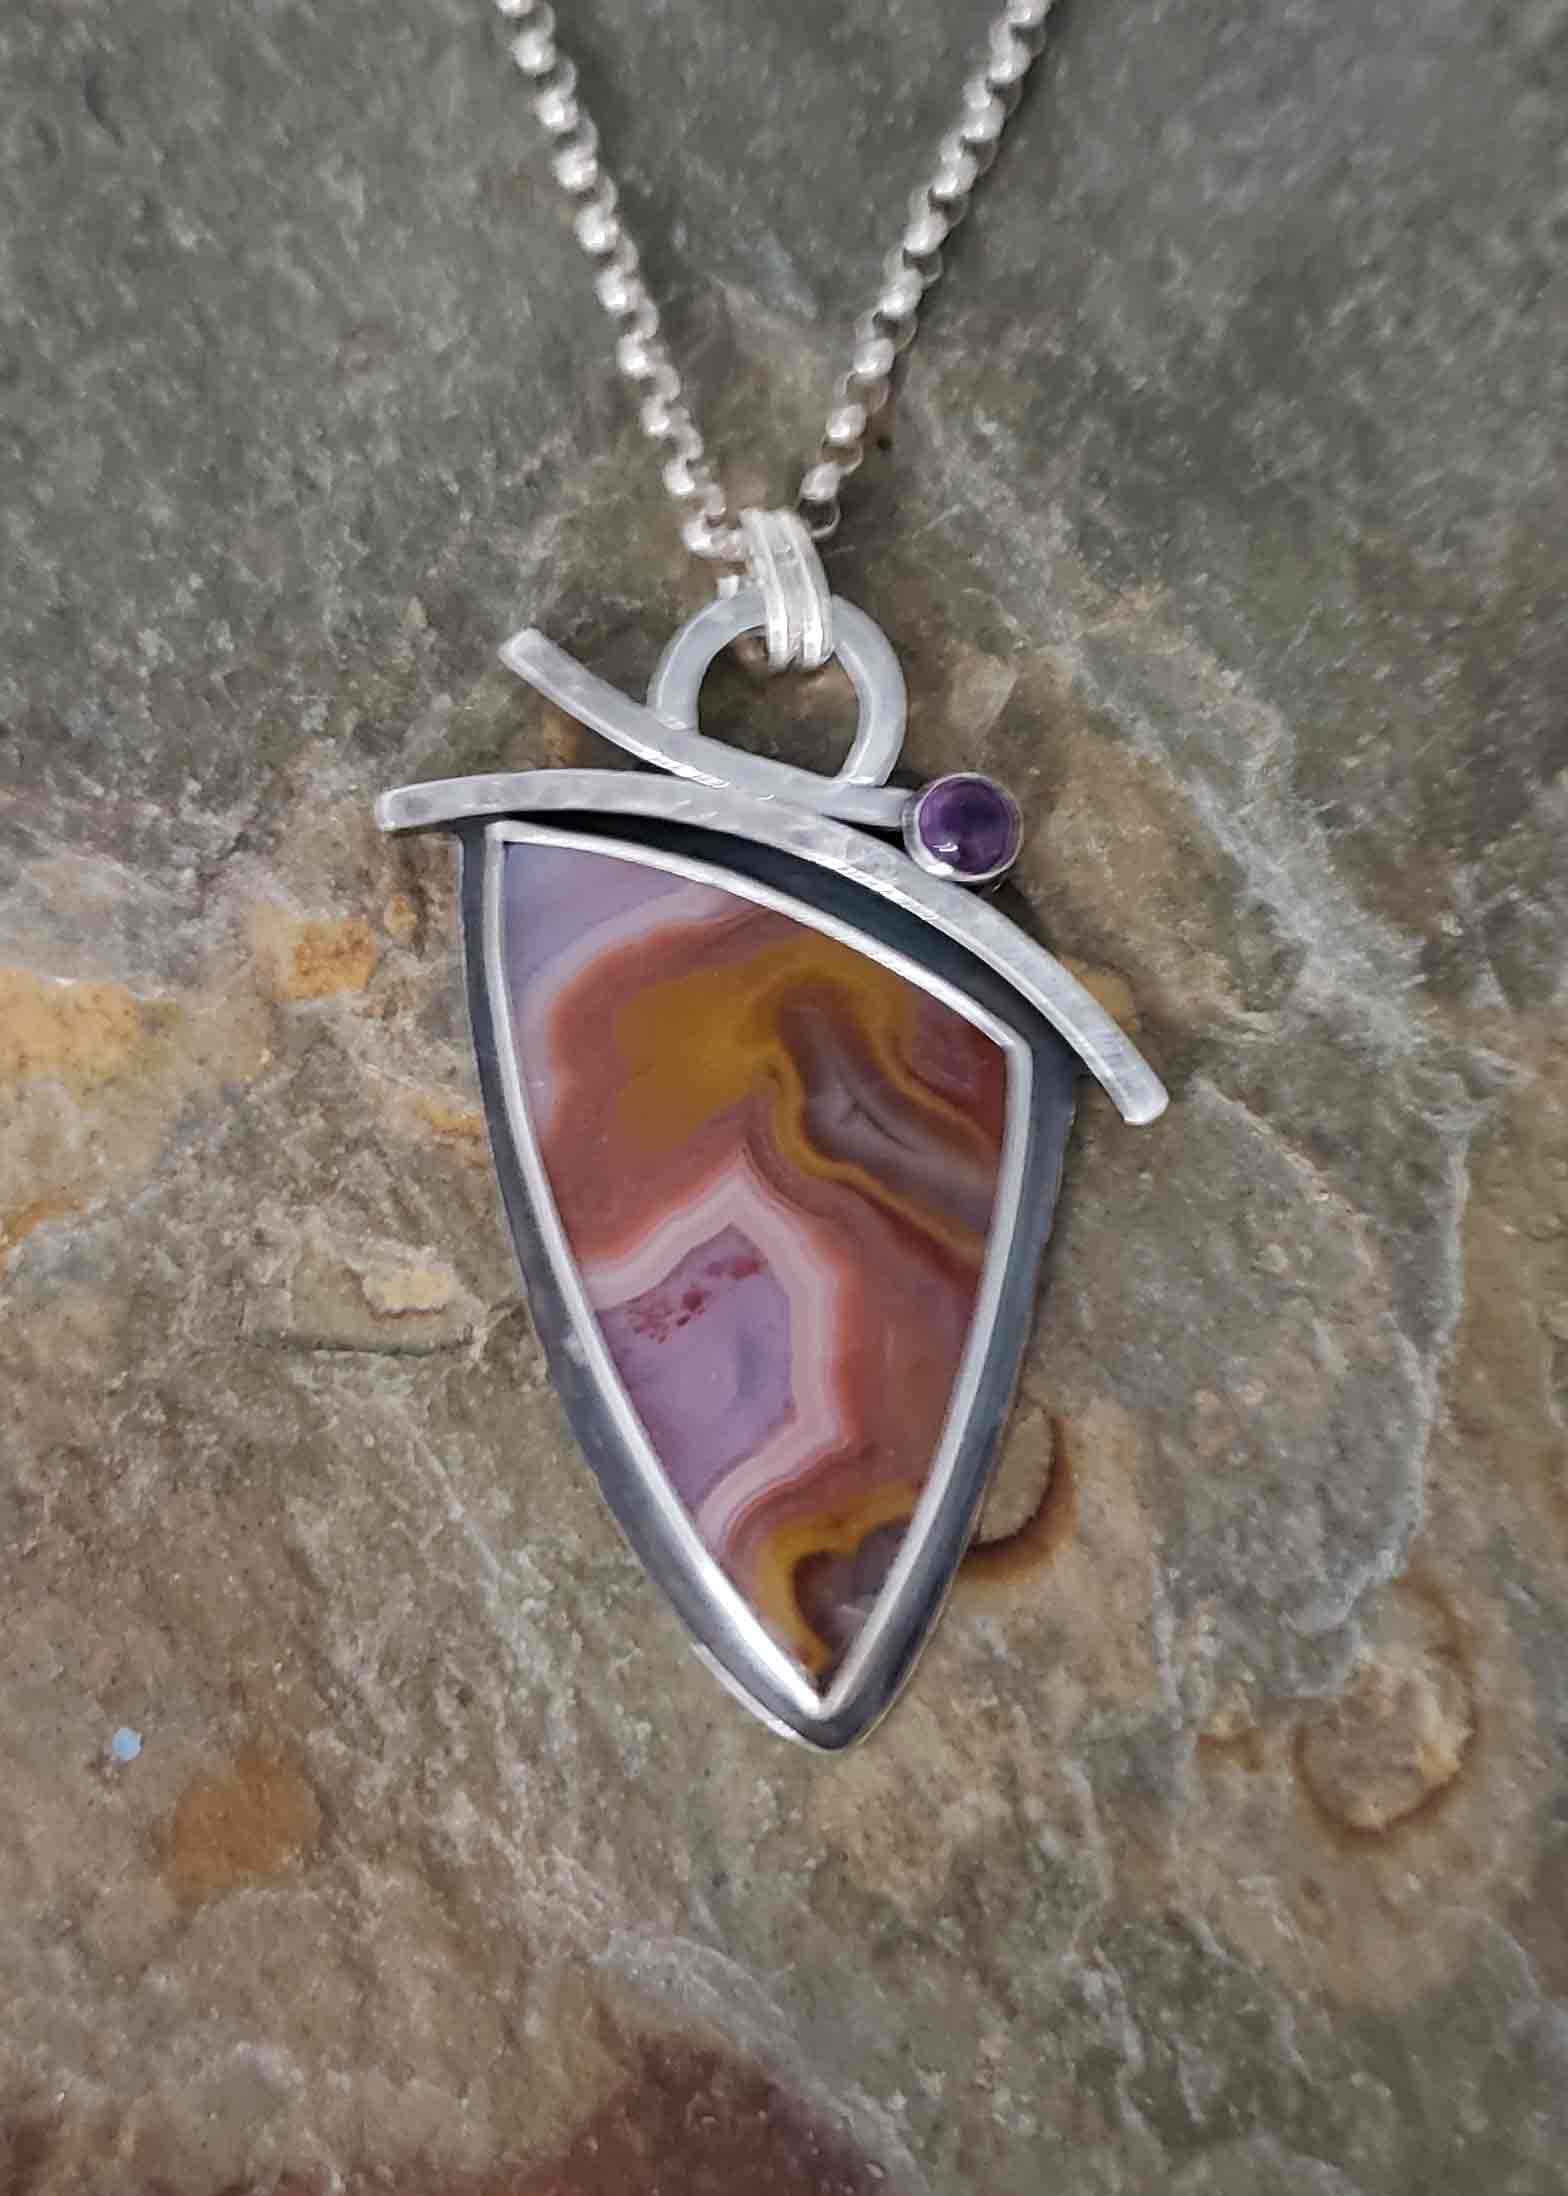 purples and rusts dominate this focal stone agua nueva, accented with amethyst